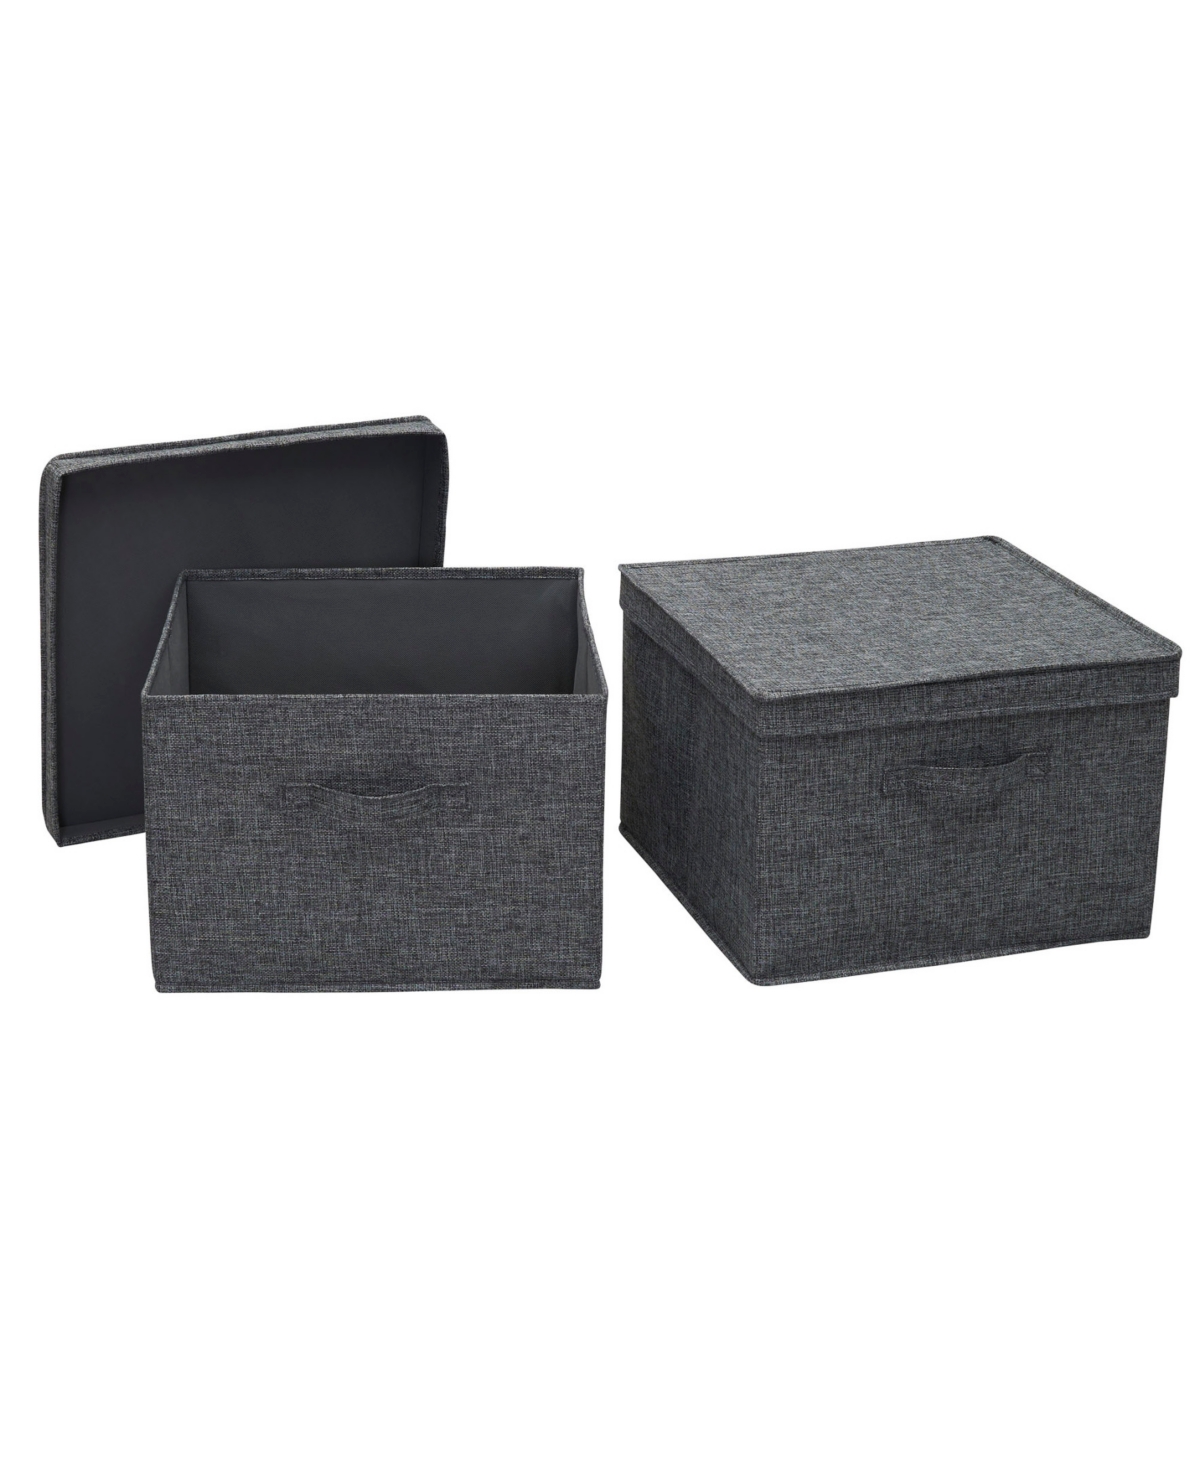 Square Storage Box With Lid - Gray